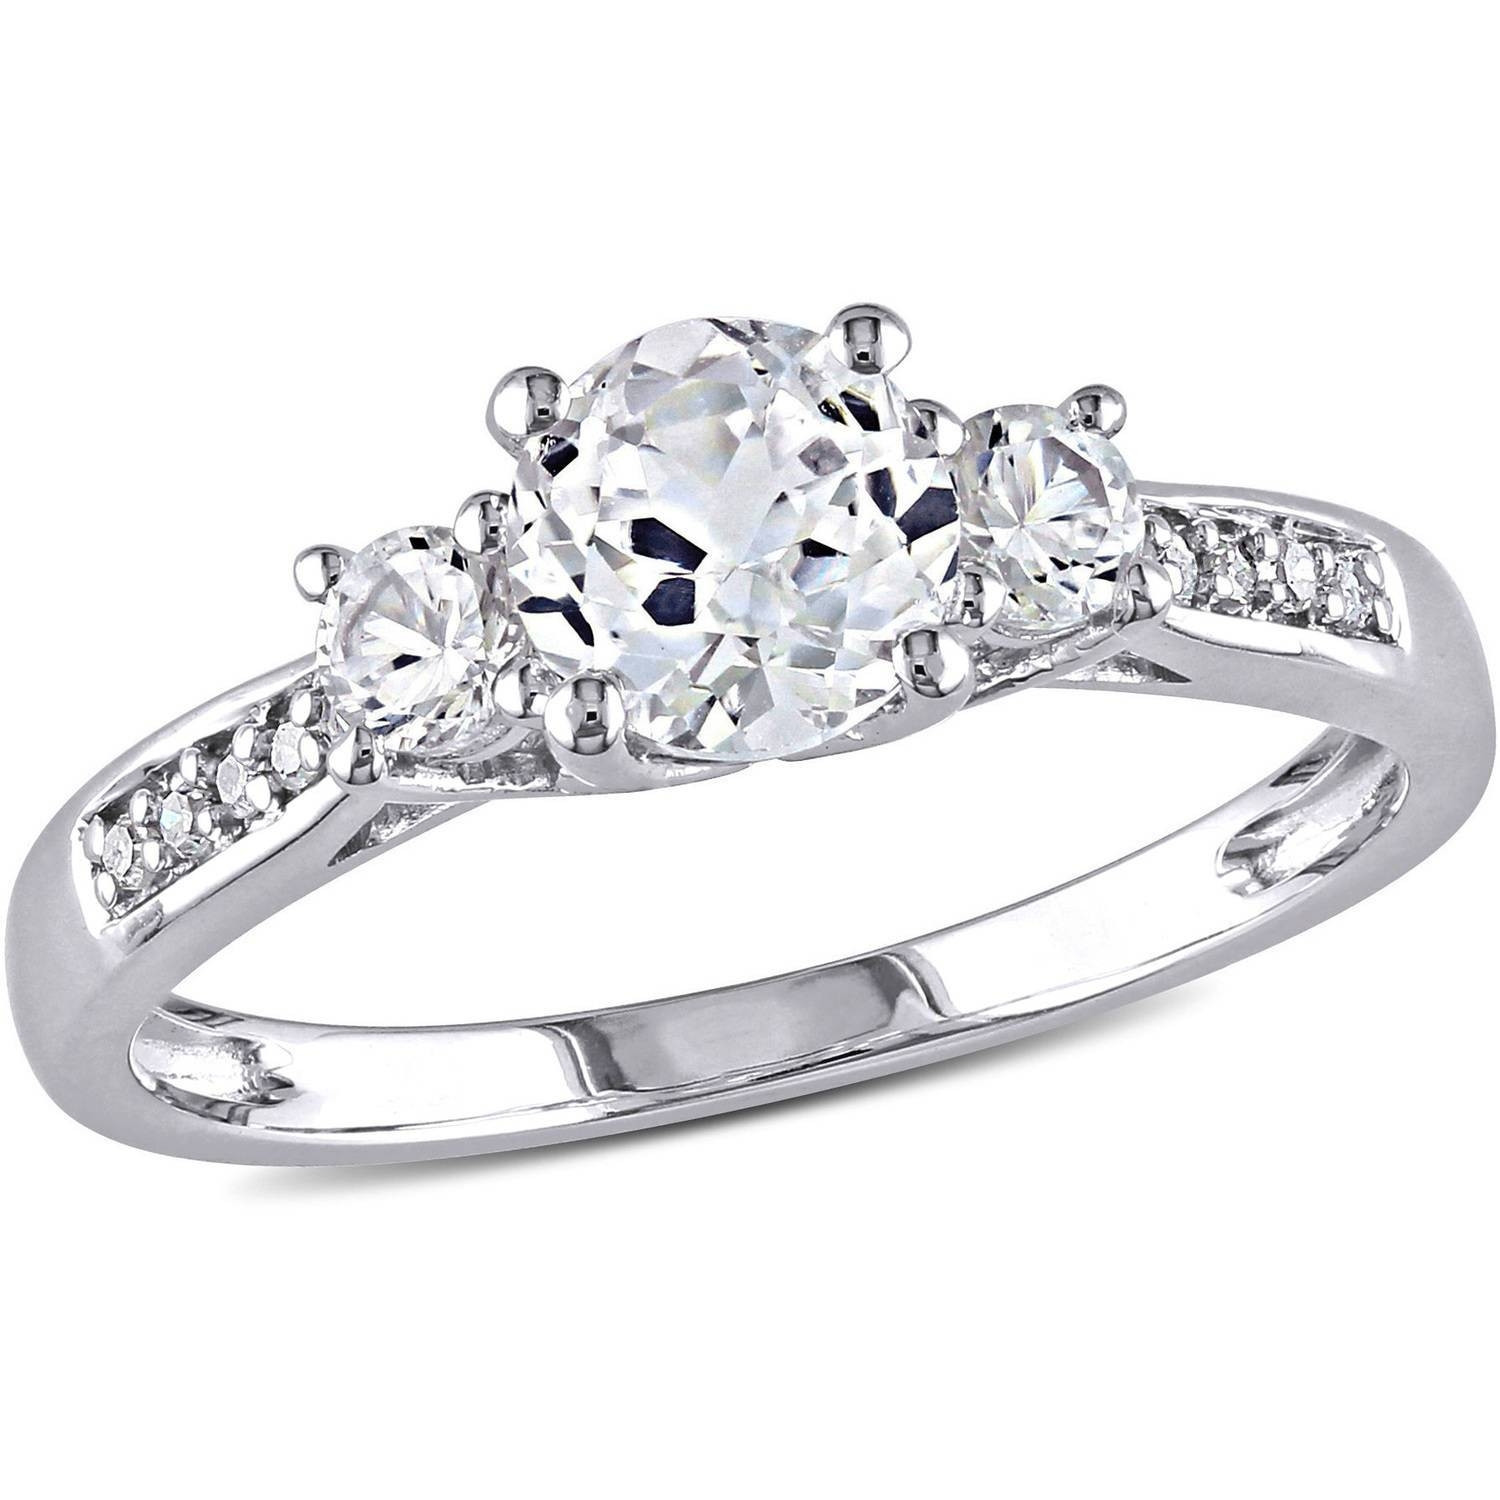 Diamond Rings At Walmart
 15 Collection of Wedding Rings With Diamonds All Around